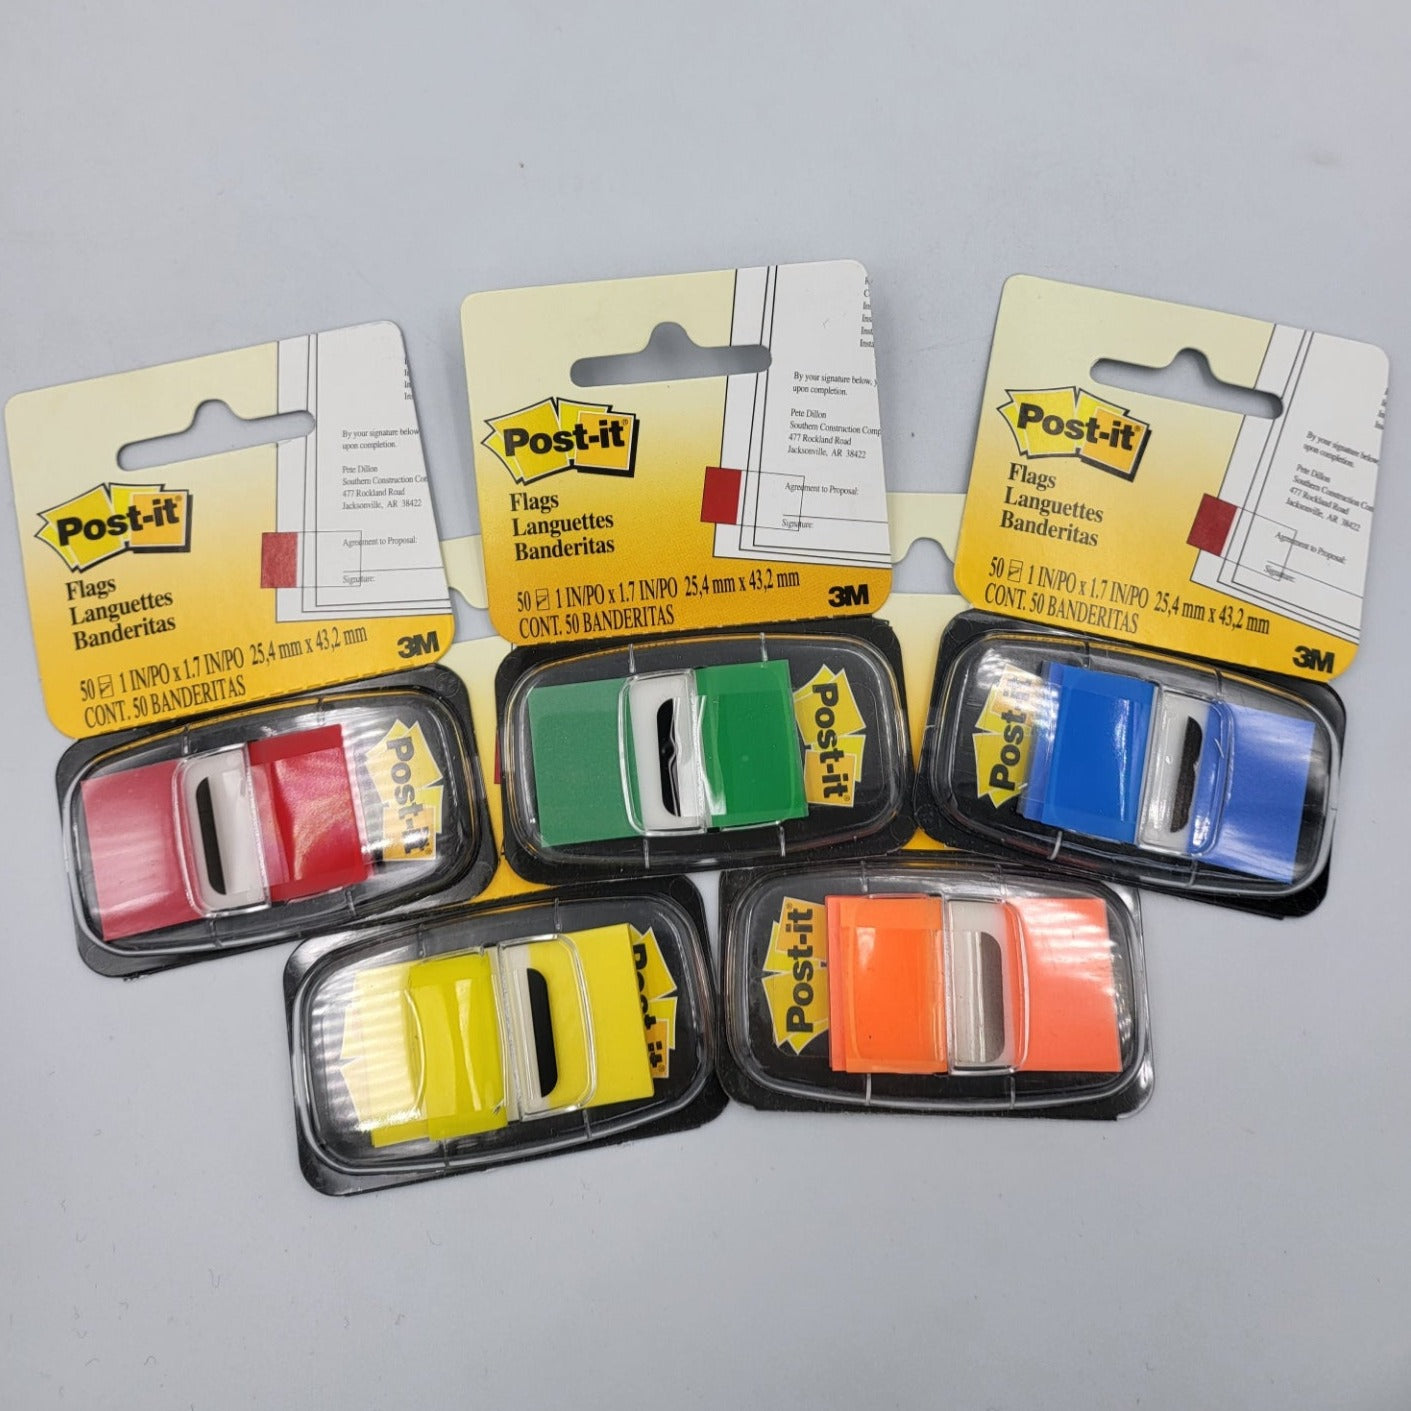 3M Post-it Flags 5's Assorted Colors